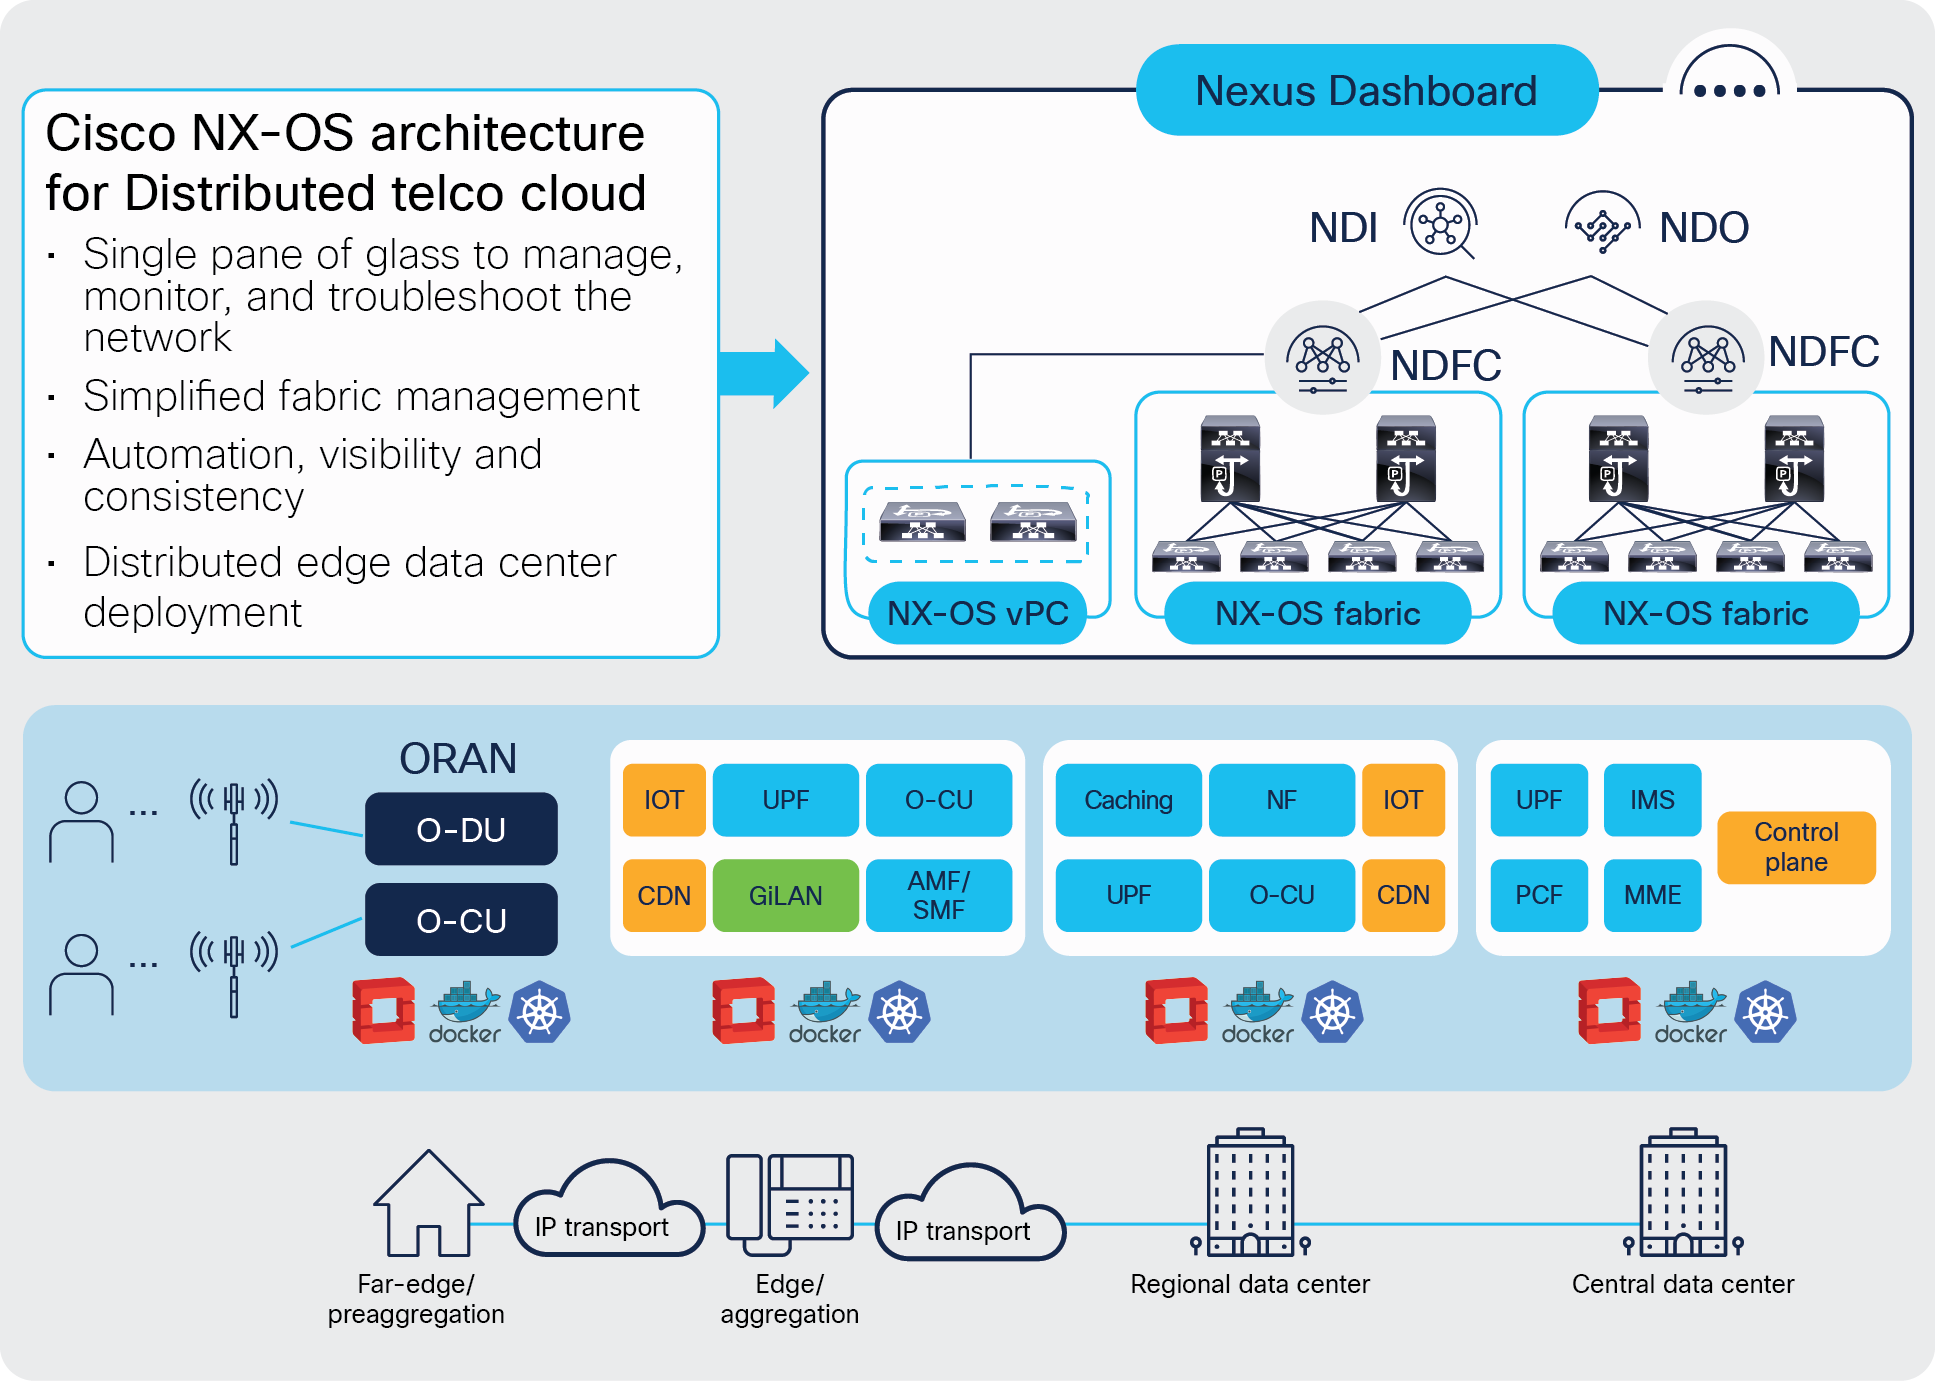 Architecting the Telco Data Center with Cisco NX-OS and NDFC